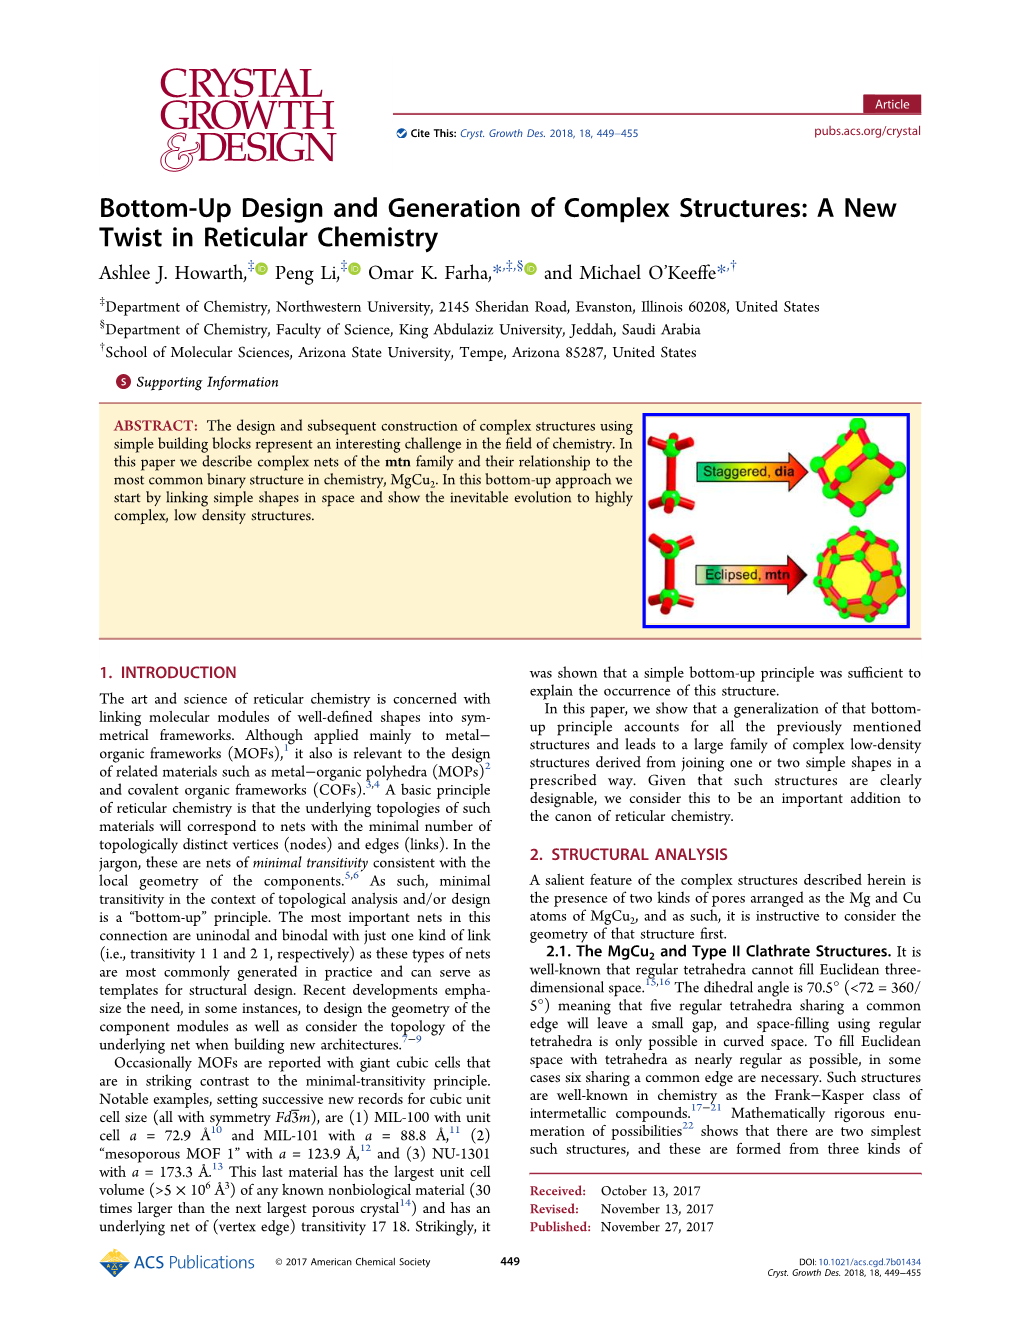 Bottom-Up Design and Generation of Complex Structures: a New Twist in Reticular Chemistry ‡ ‡ ‡ § † Ashlee J